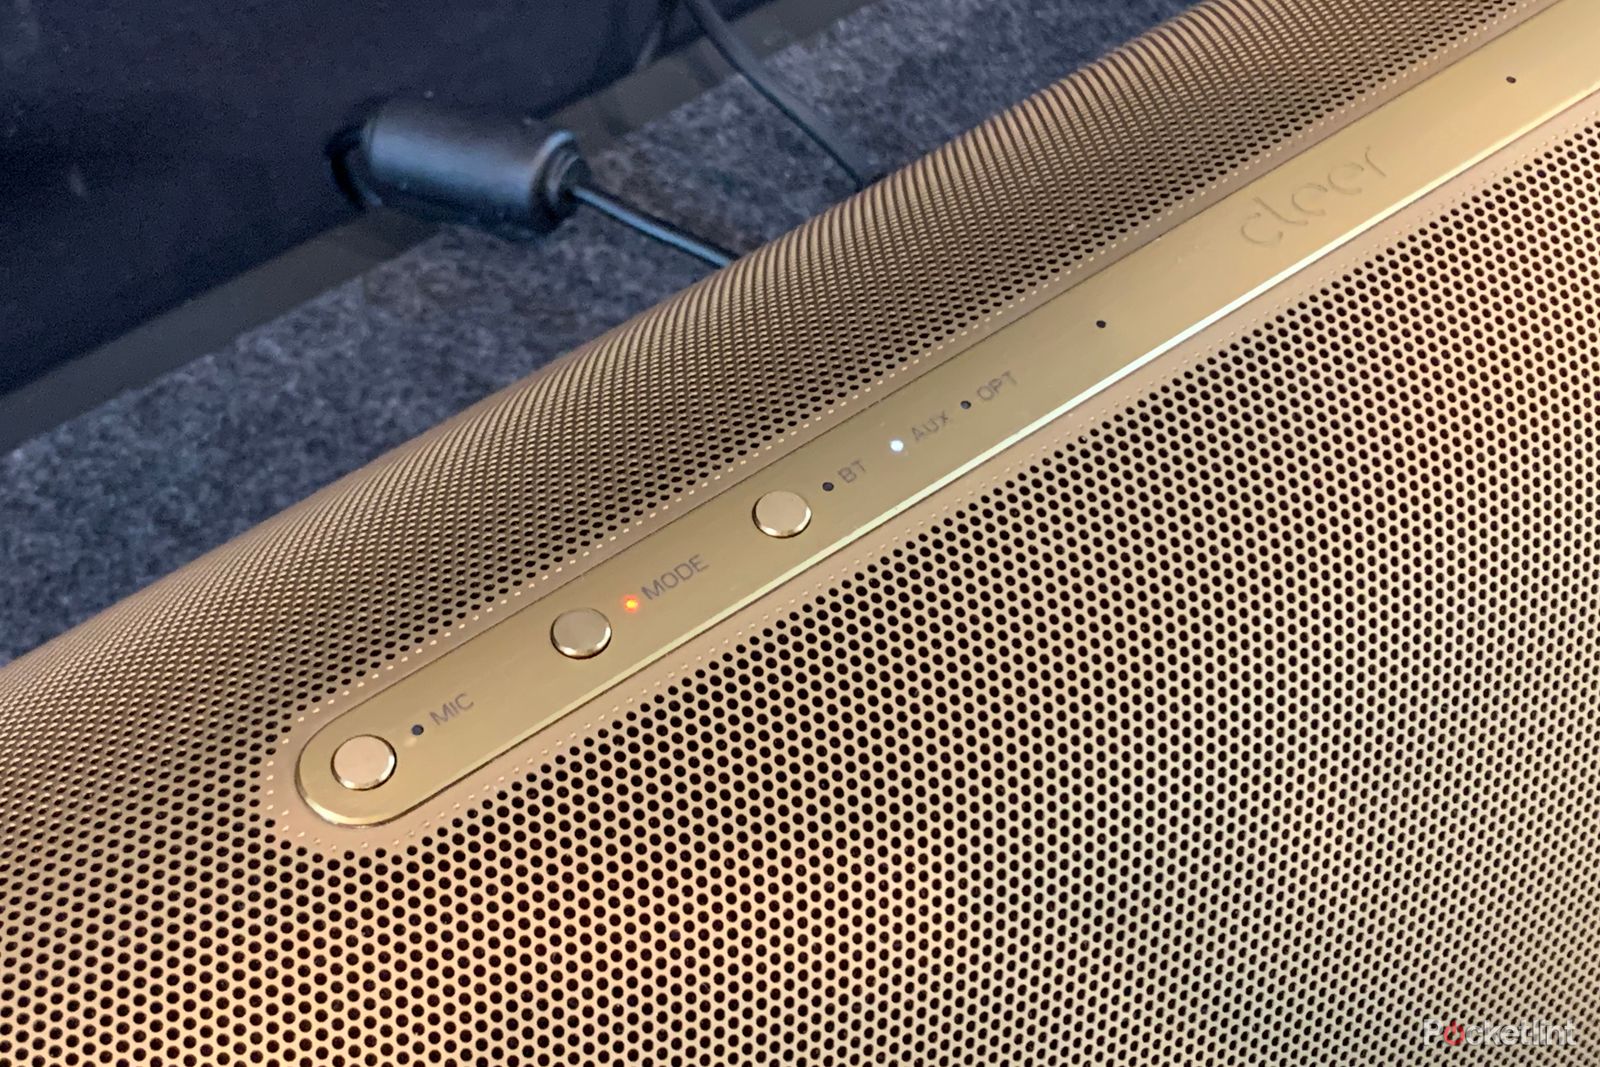 Cleers super-looking Crescent smart speaker will be with us later in 2020 and is sounding great image 1